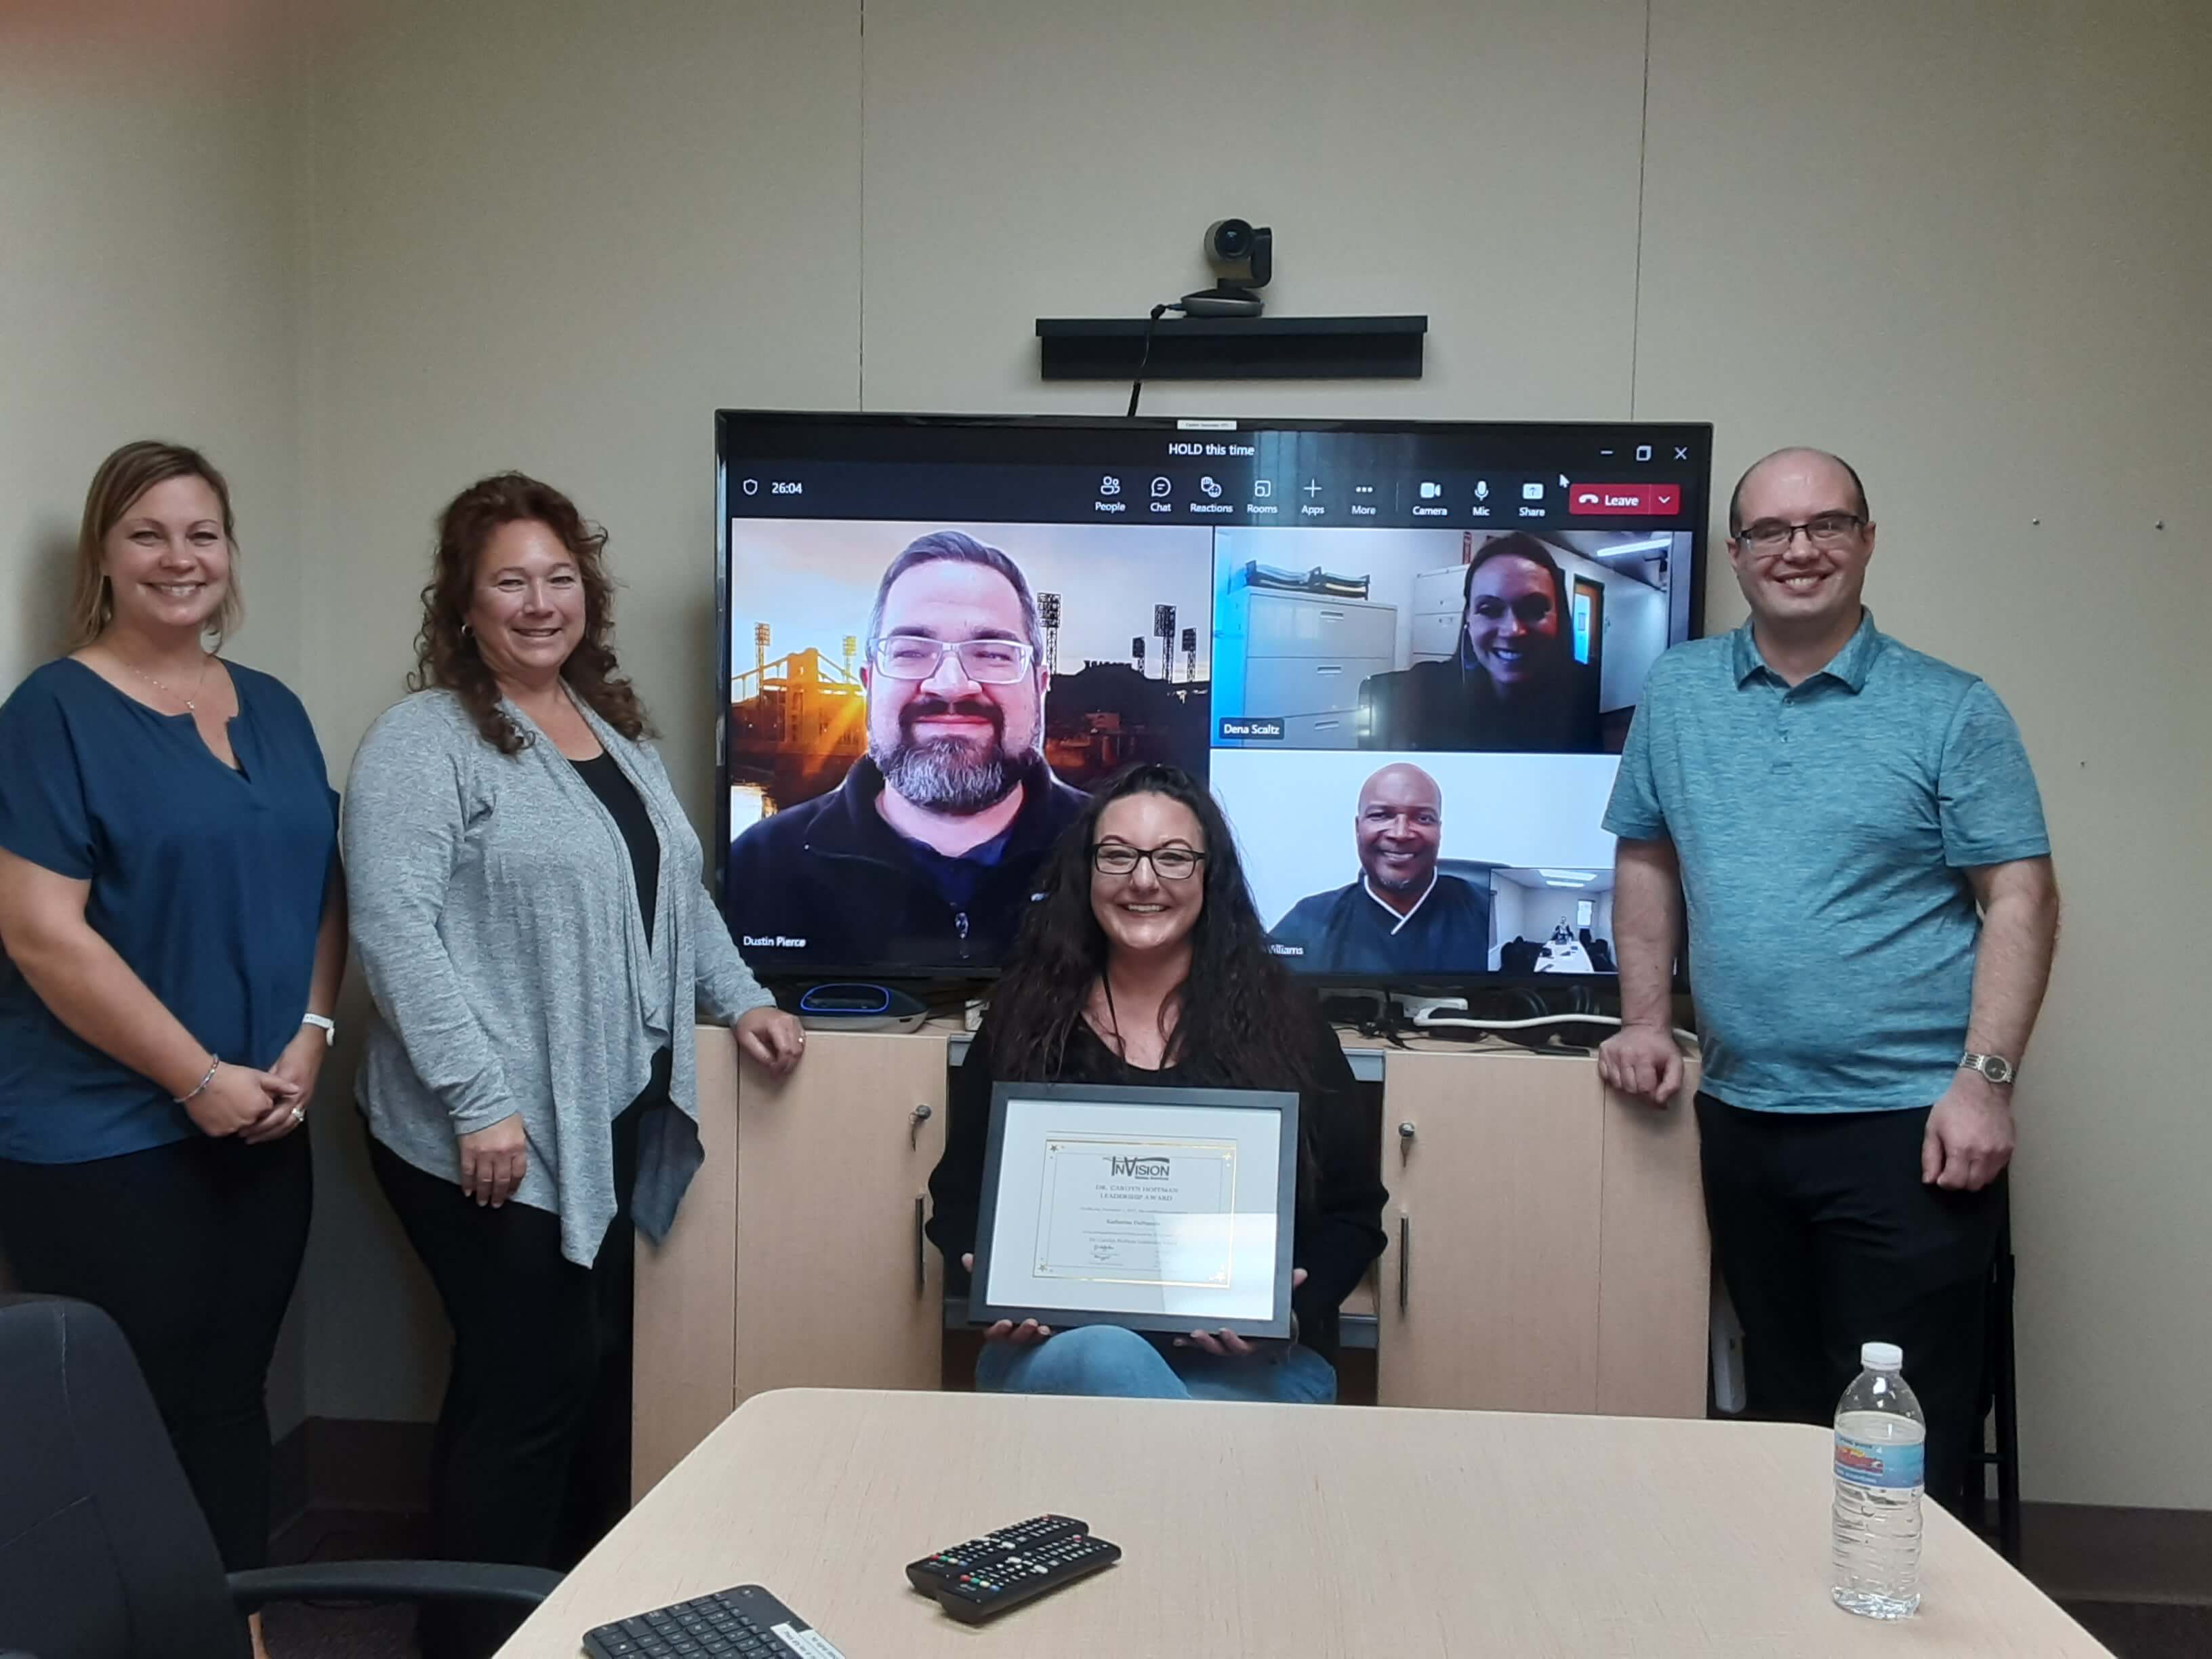 Katherine DeNunzio, seated, holds her leadership award in front of a TV screen with InVision leadership on it and flanked by additional InVision leadership